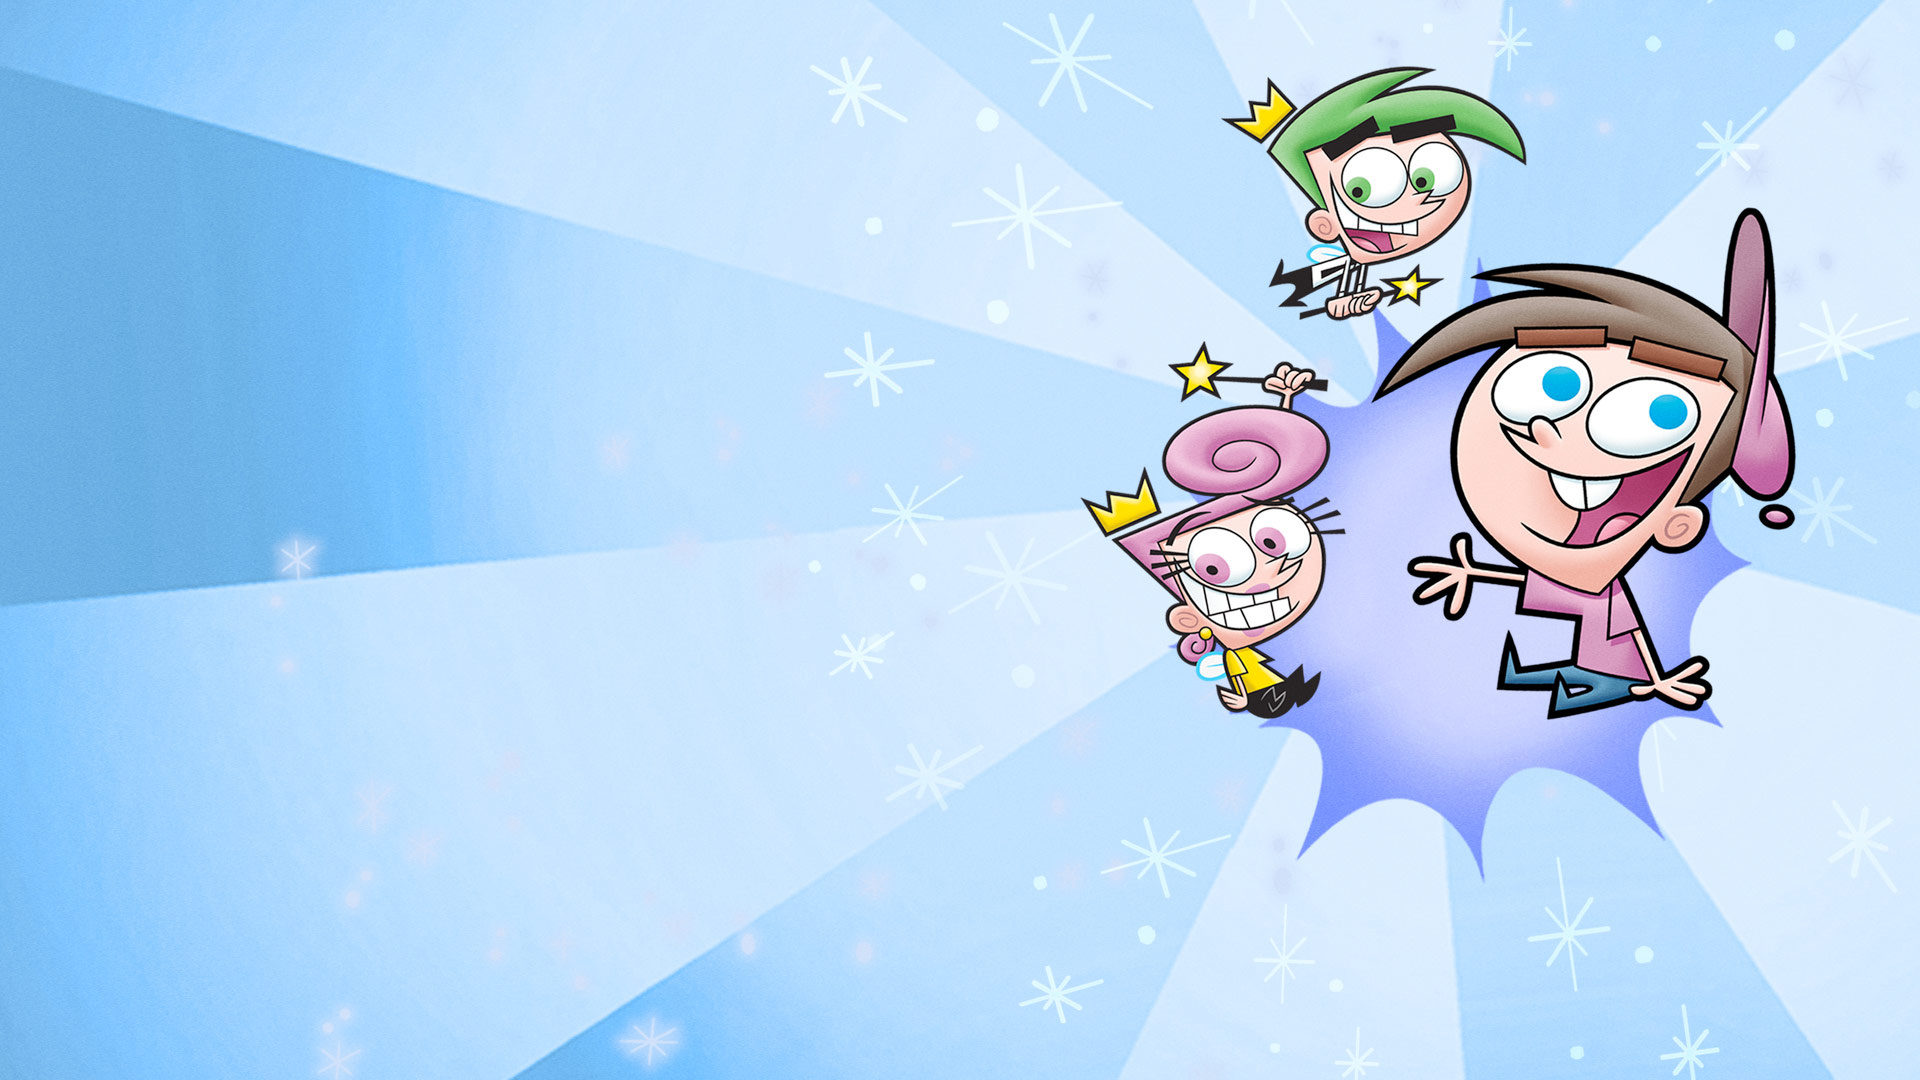 The Fairly OddParents, Animation, Wallpapers, 1920x1080 Full HD Desktop